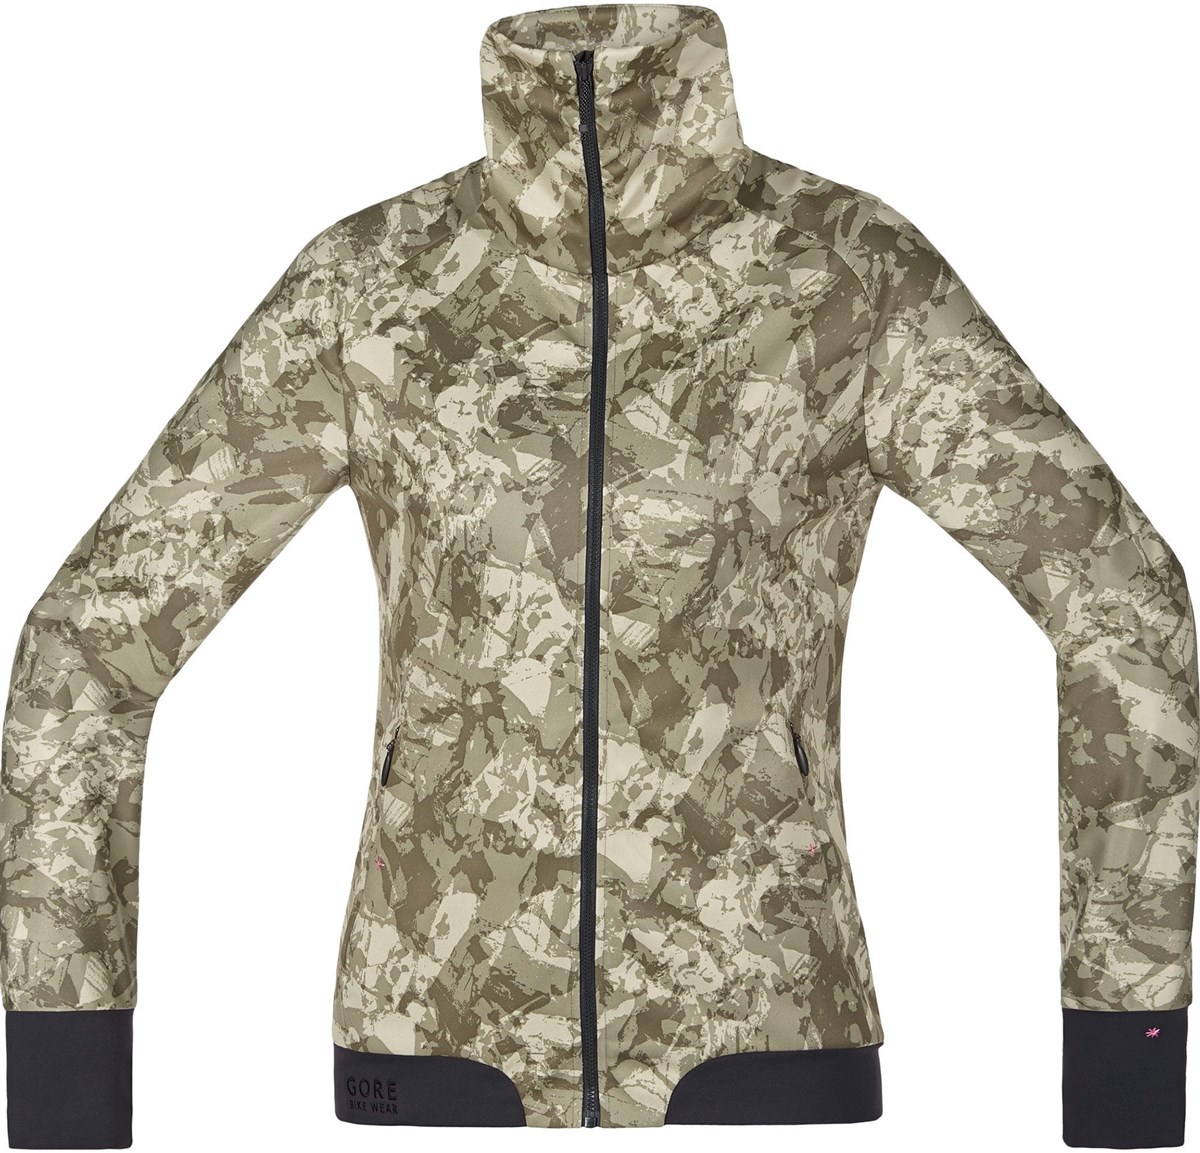 Gore Power Trail Womens Print Windstopper Soft Shell Jacket AW17